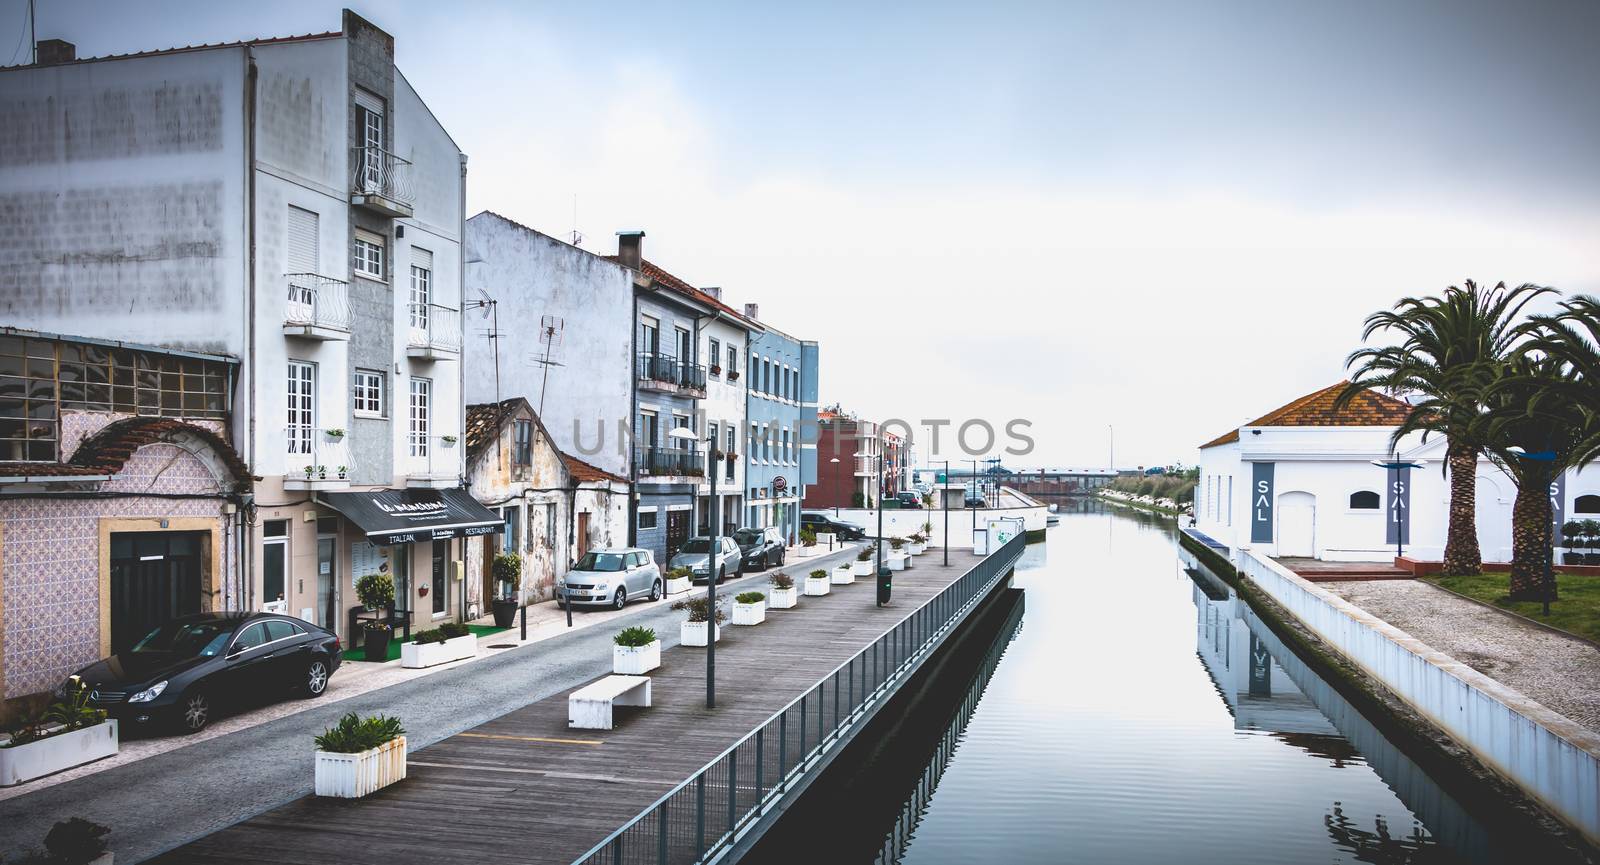 Aveiro, Portugal - May 7, 2018: view of the houses surrounding a canal with reflections in the historic city center on a spring day